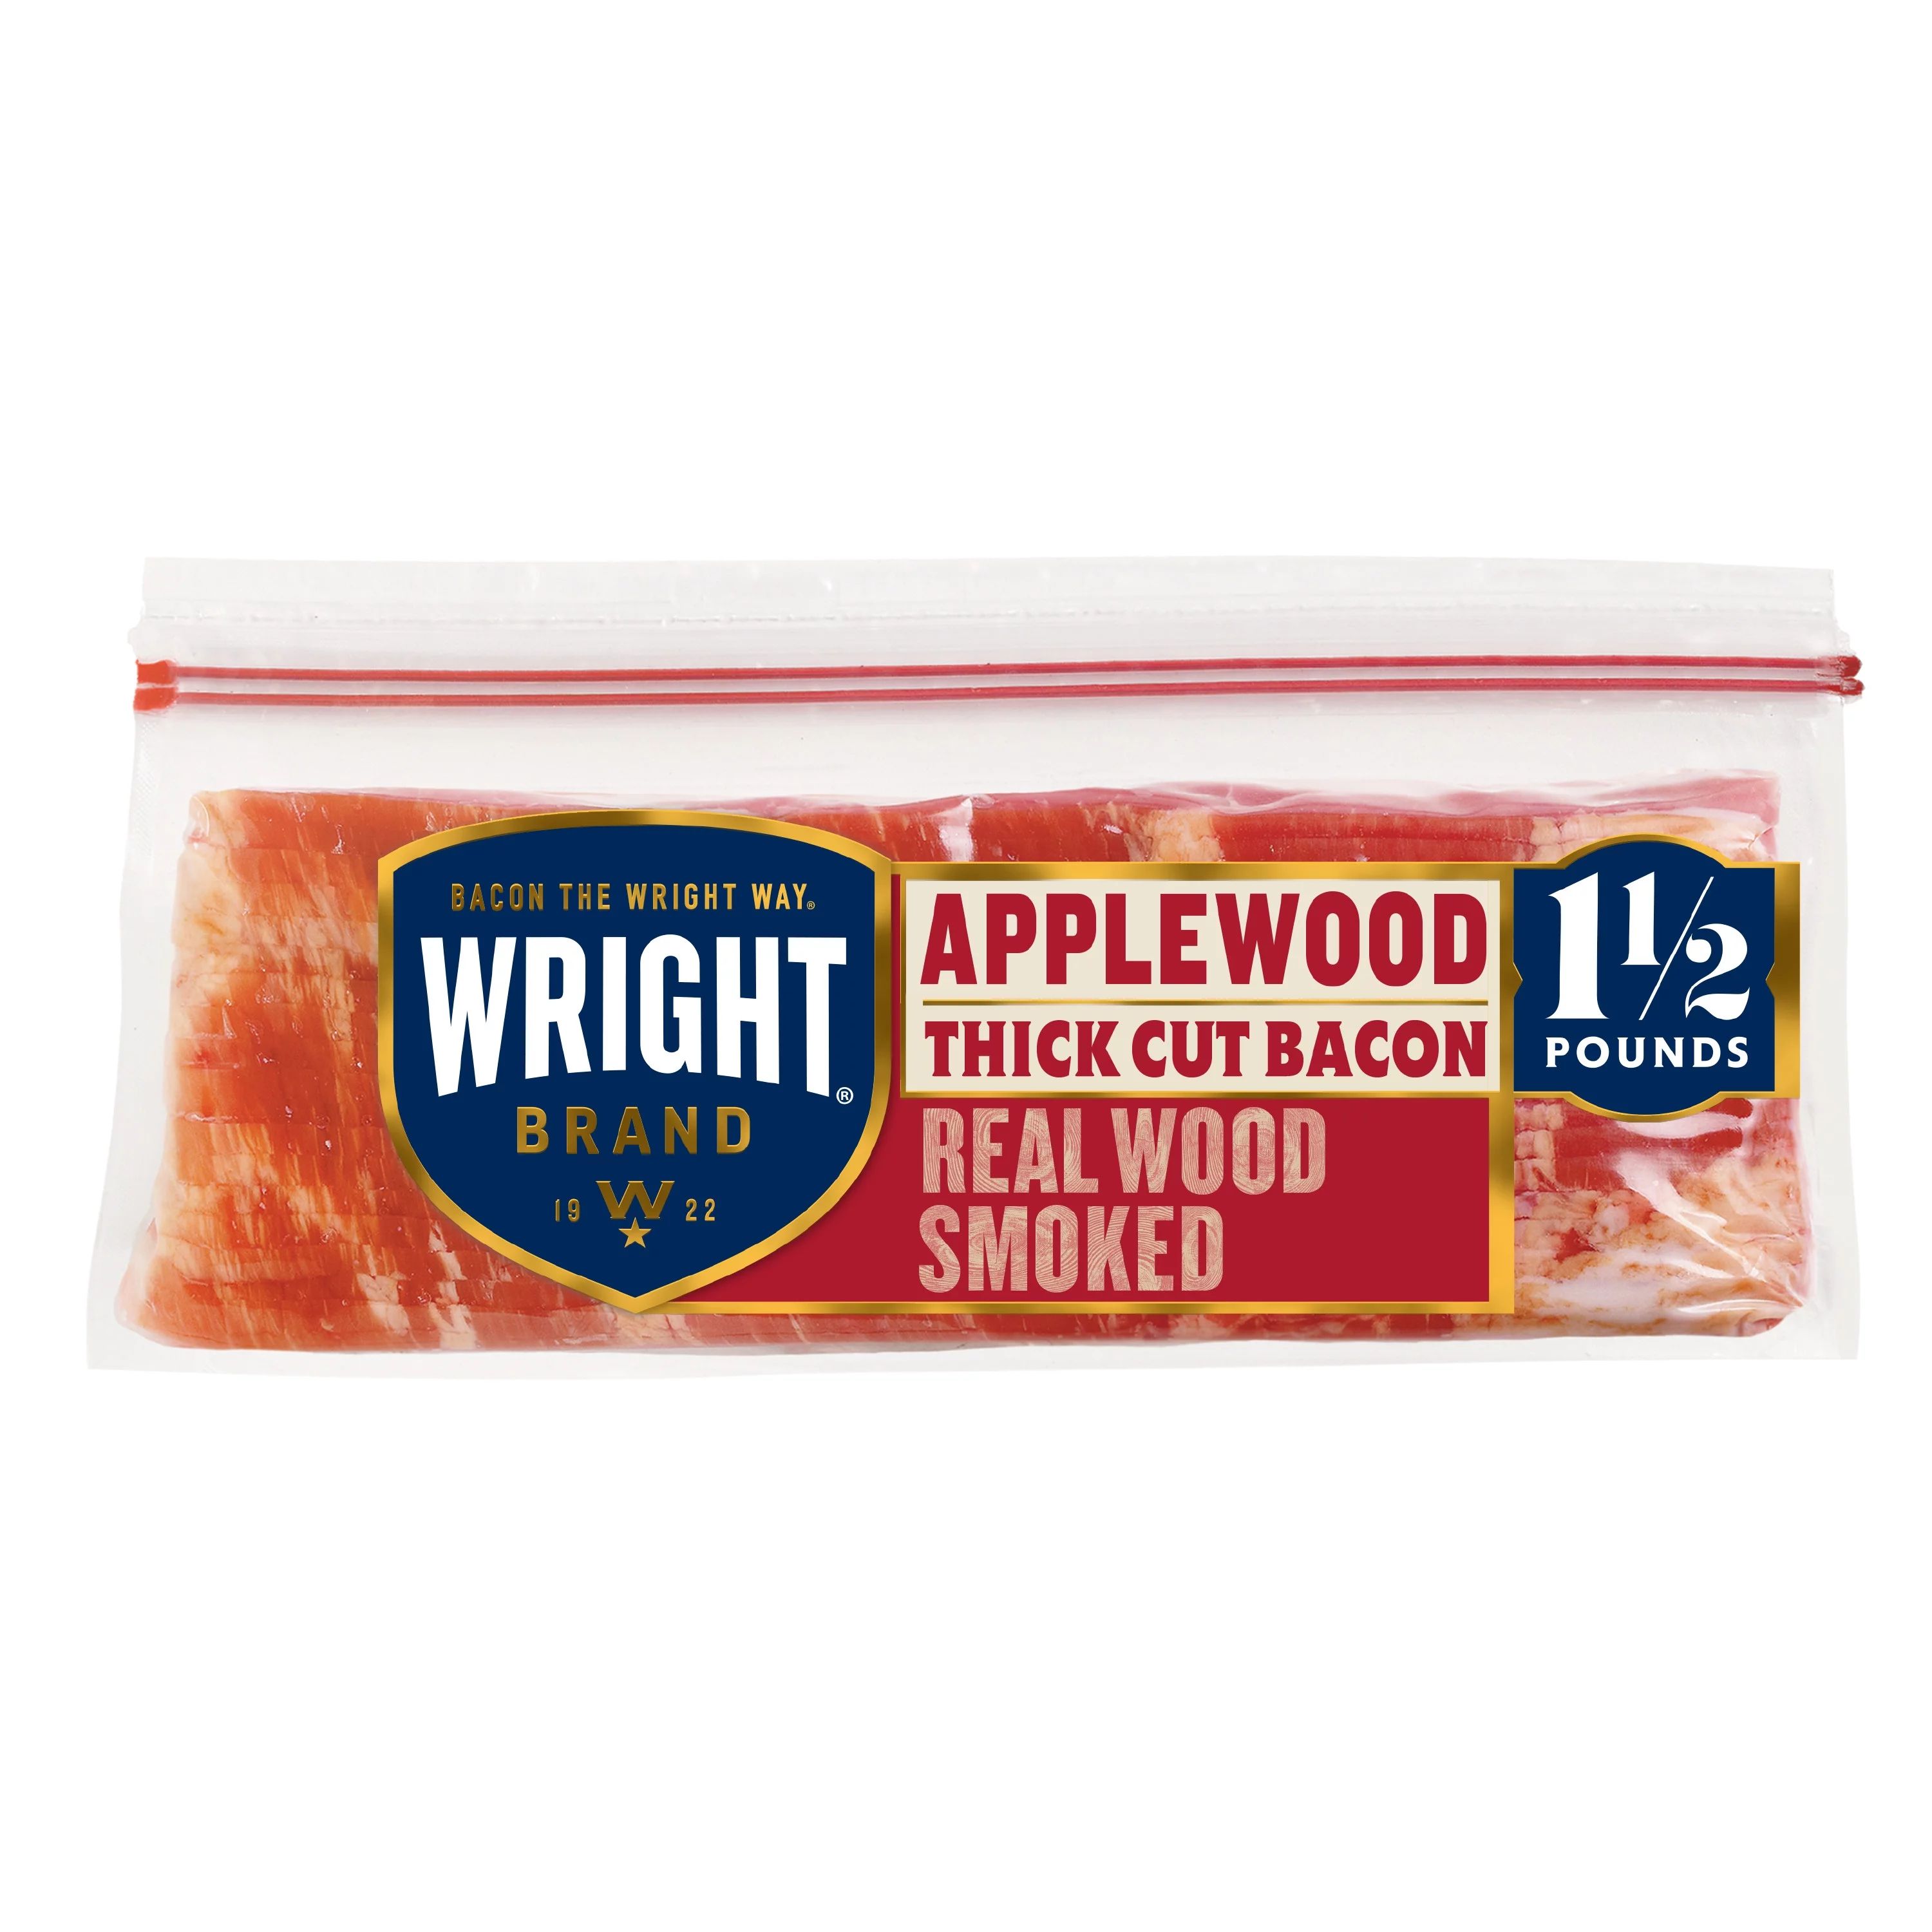 Wright Brand Thick Cut Applewood Real Wood Smoked Bacon, 1.5 lb | Walmart (US)